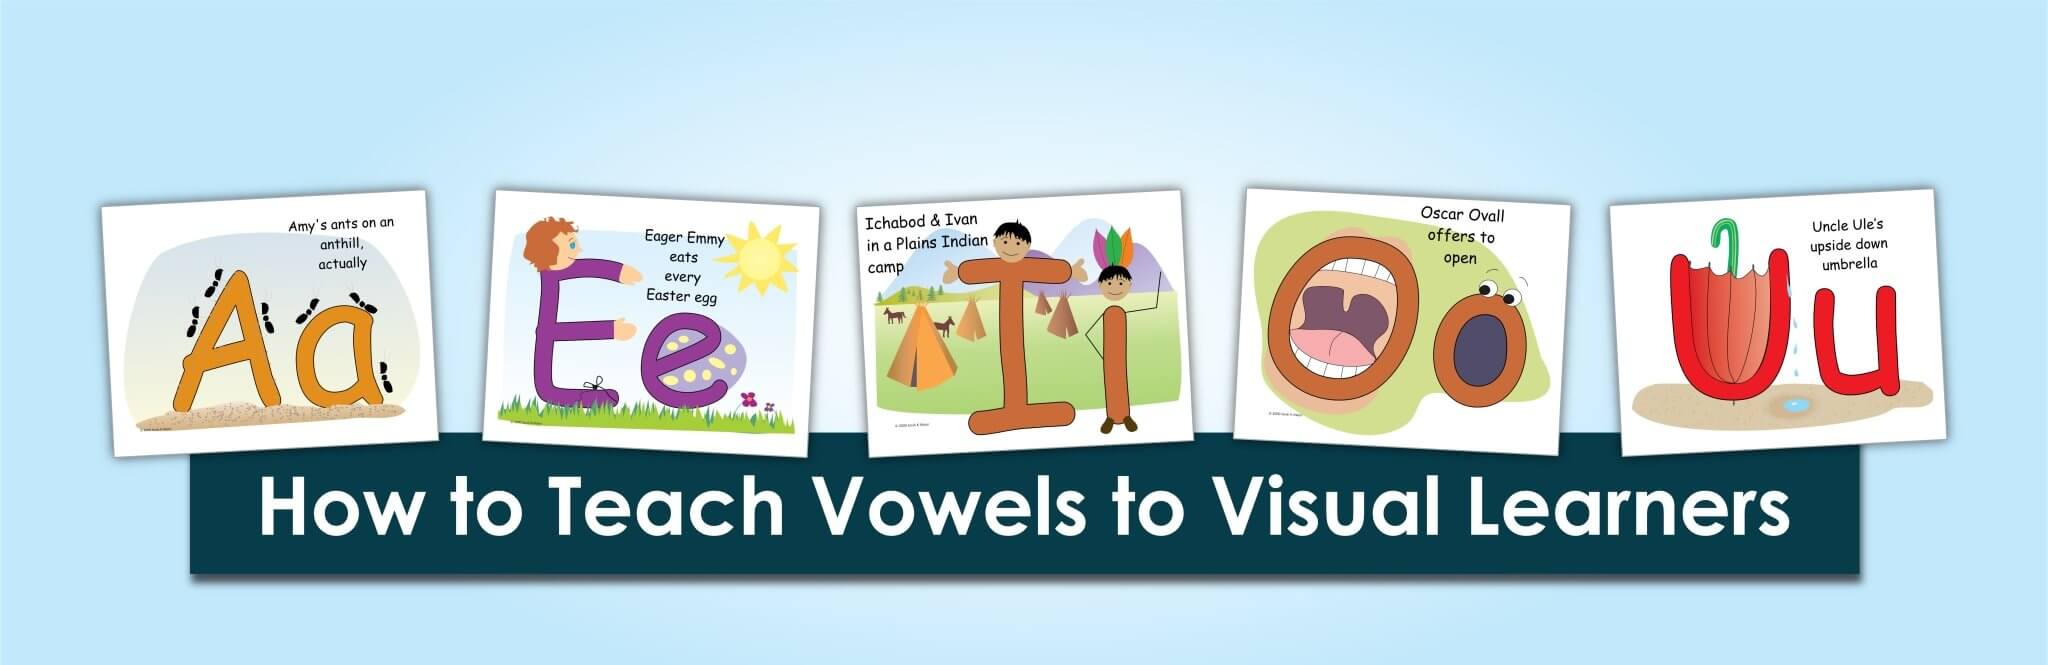 How to Teach Vowels to Visual Learners